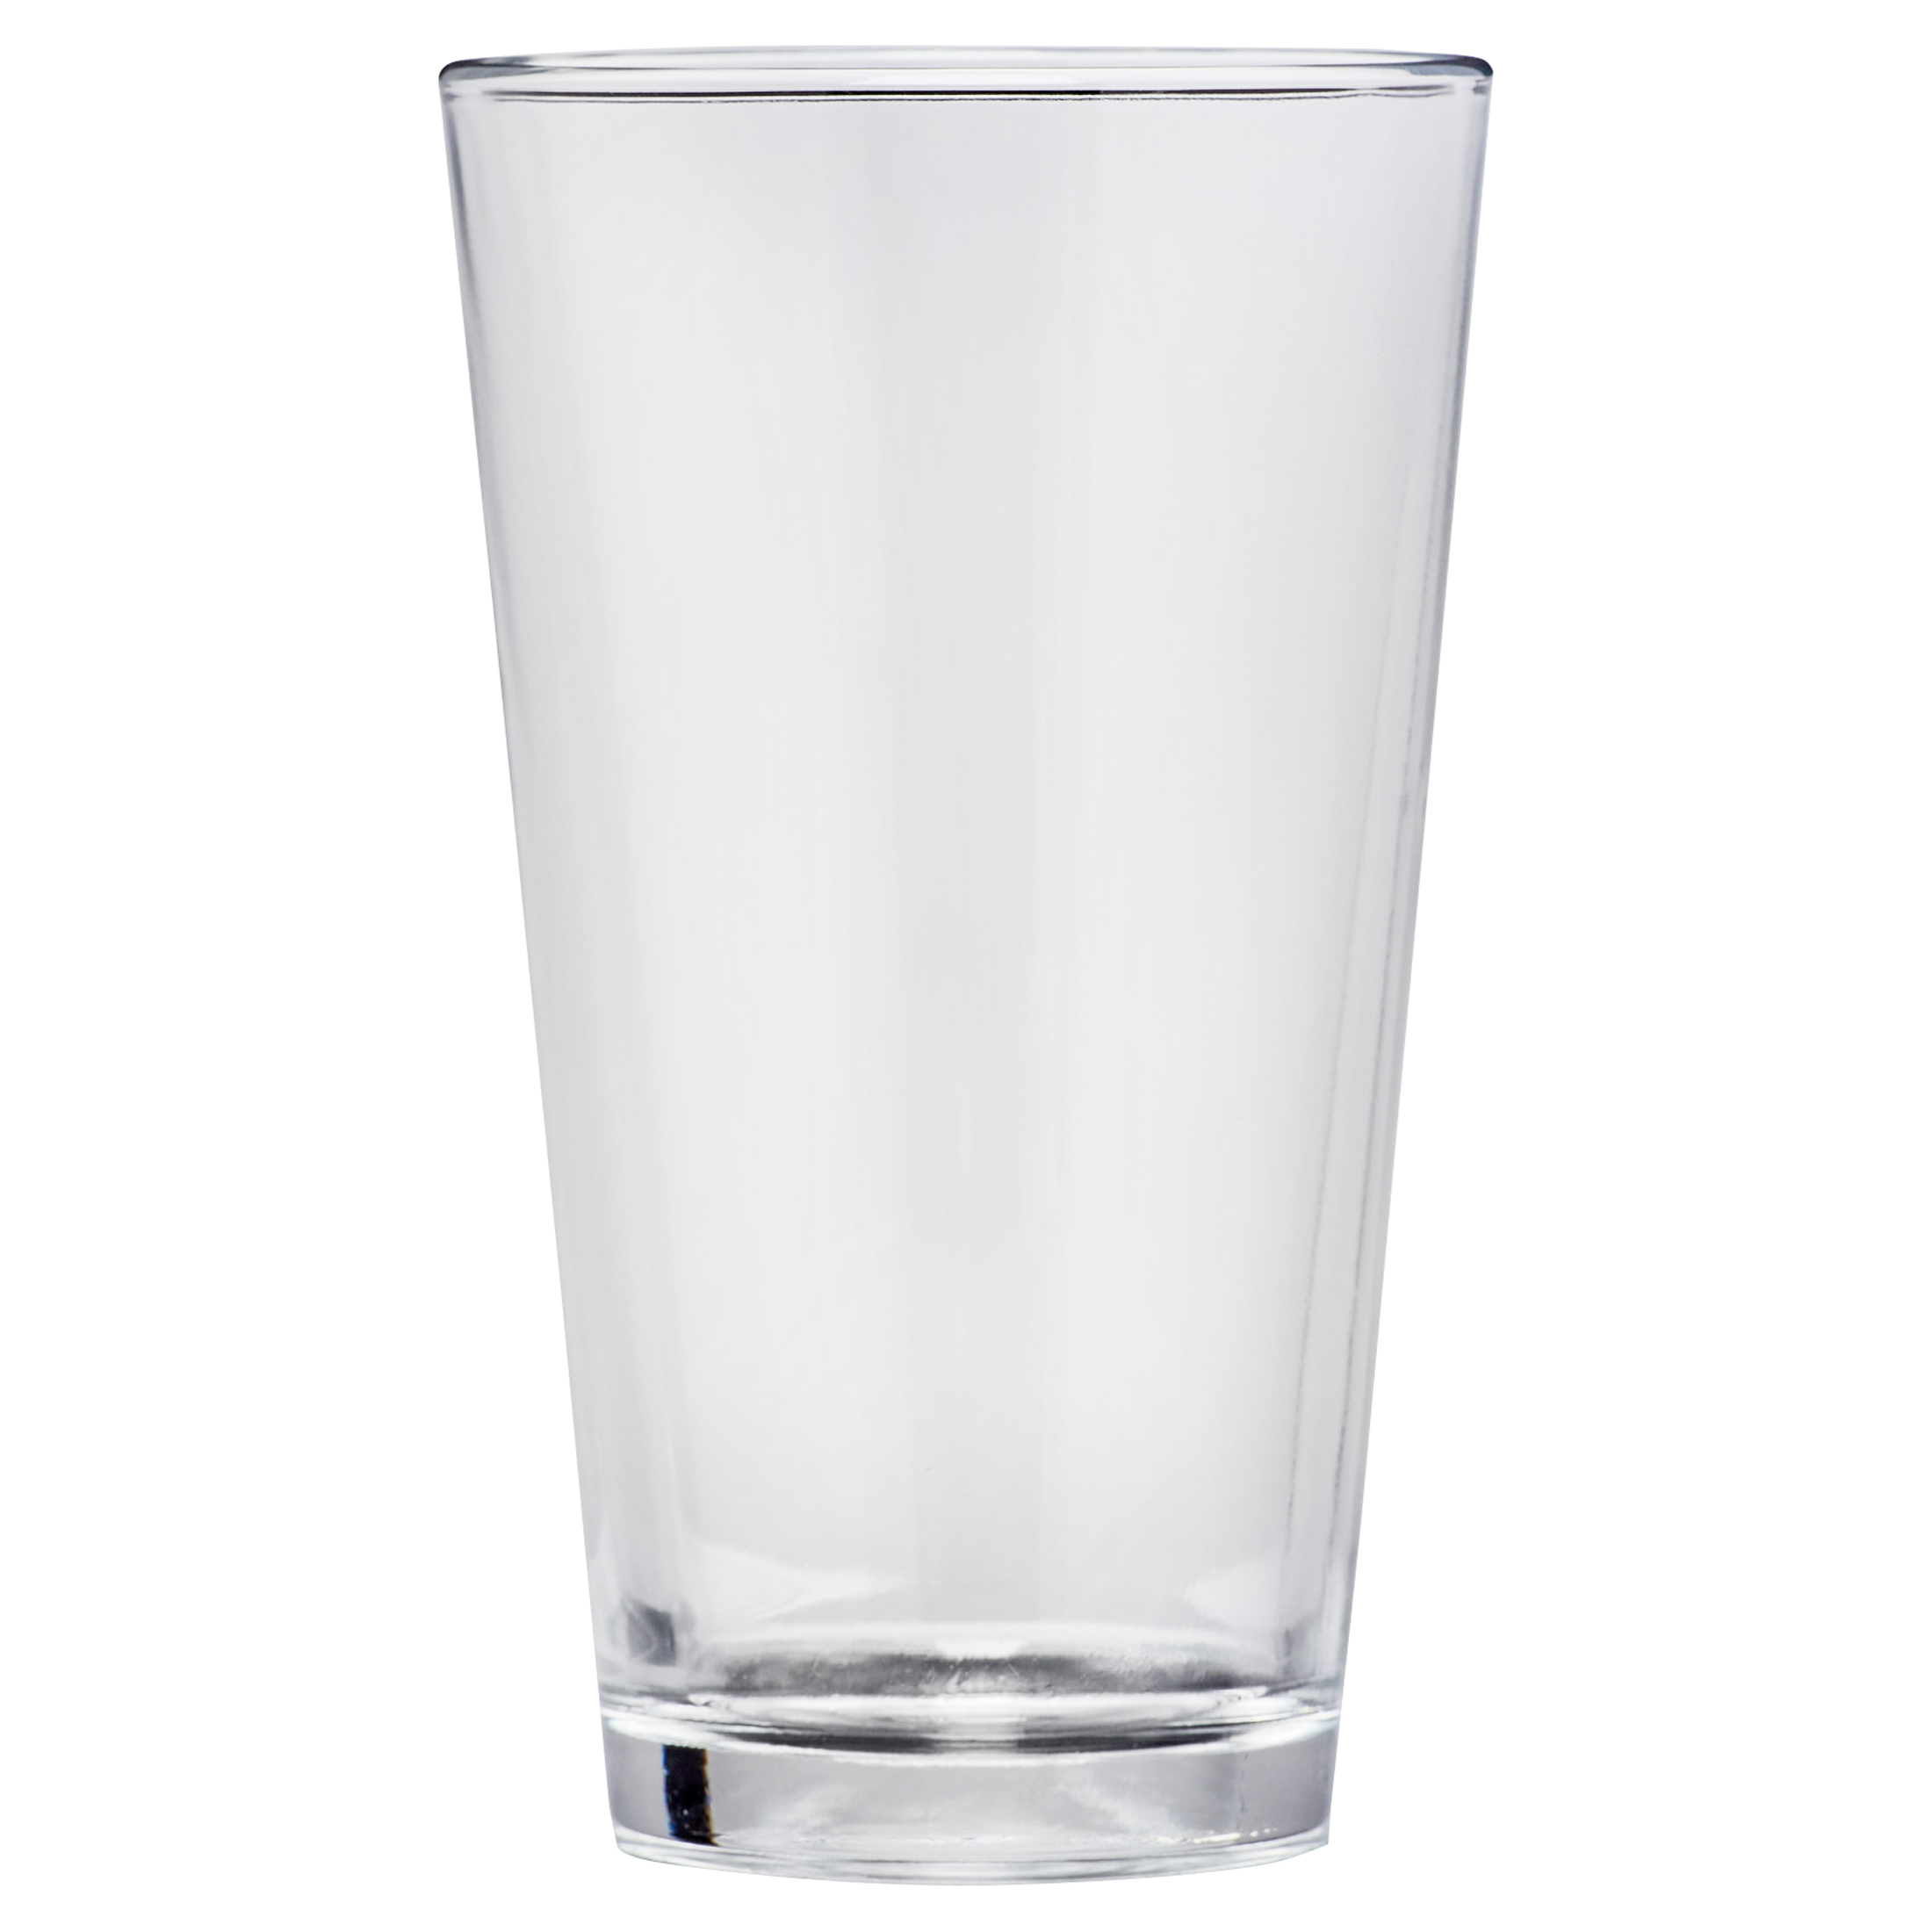 Luminarc 16 oz. Clear Glass Coolers 12 PC Set - image 1 of 6